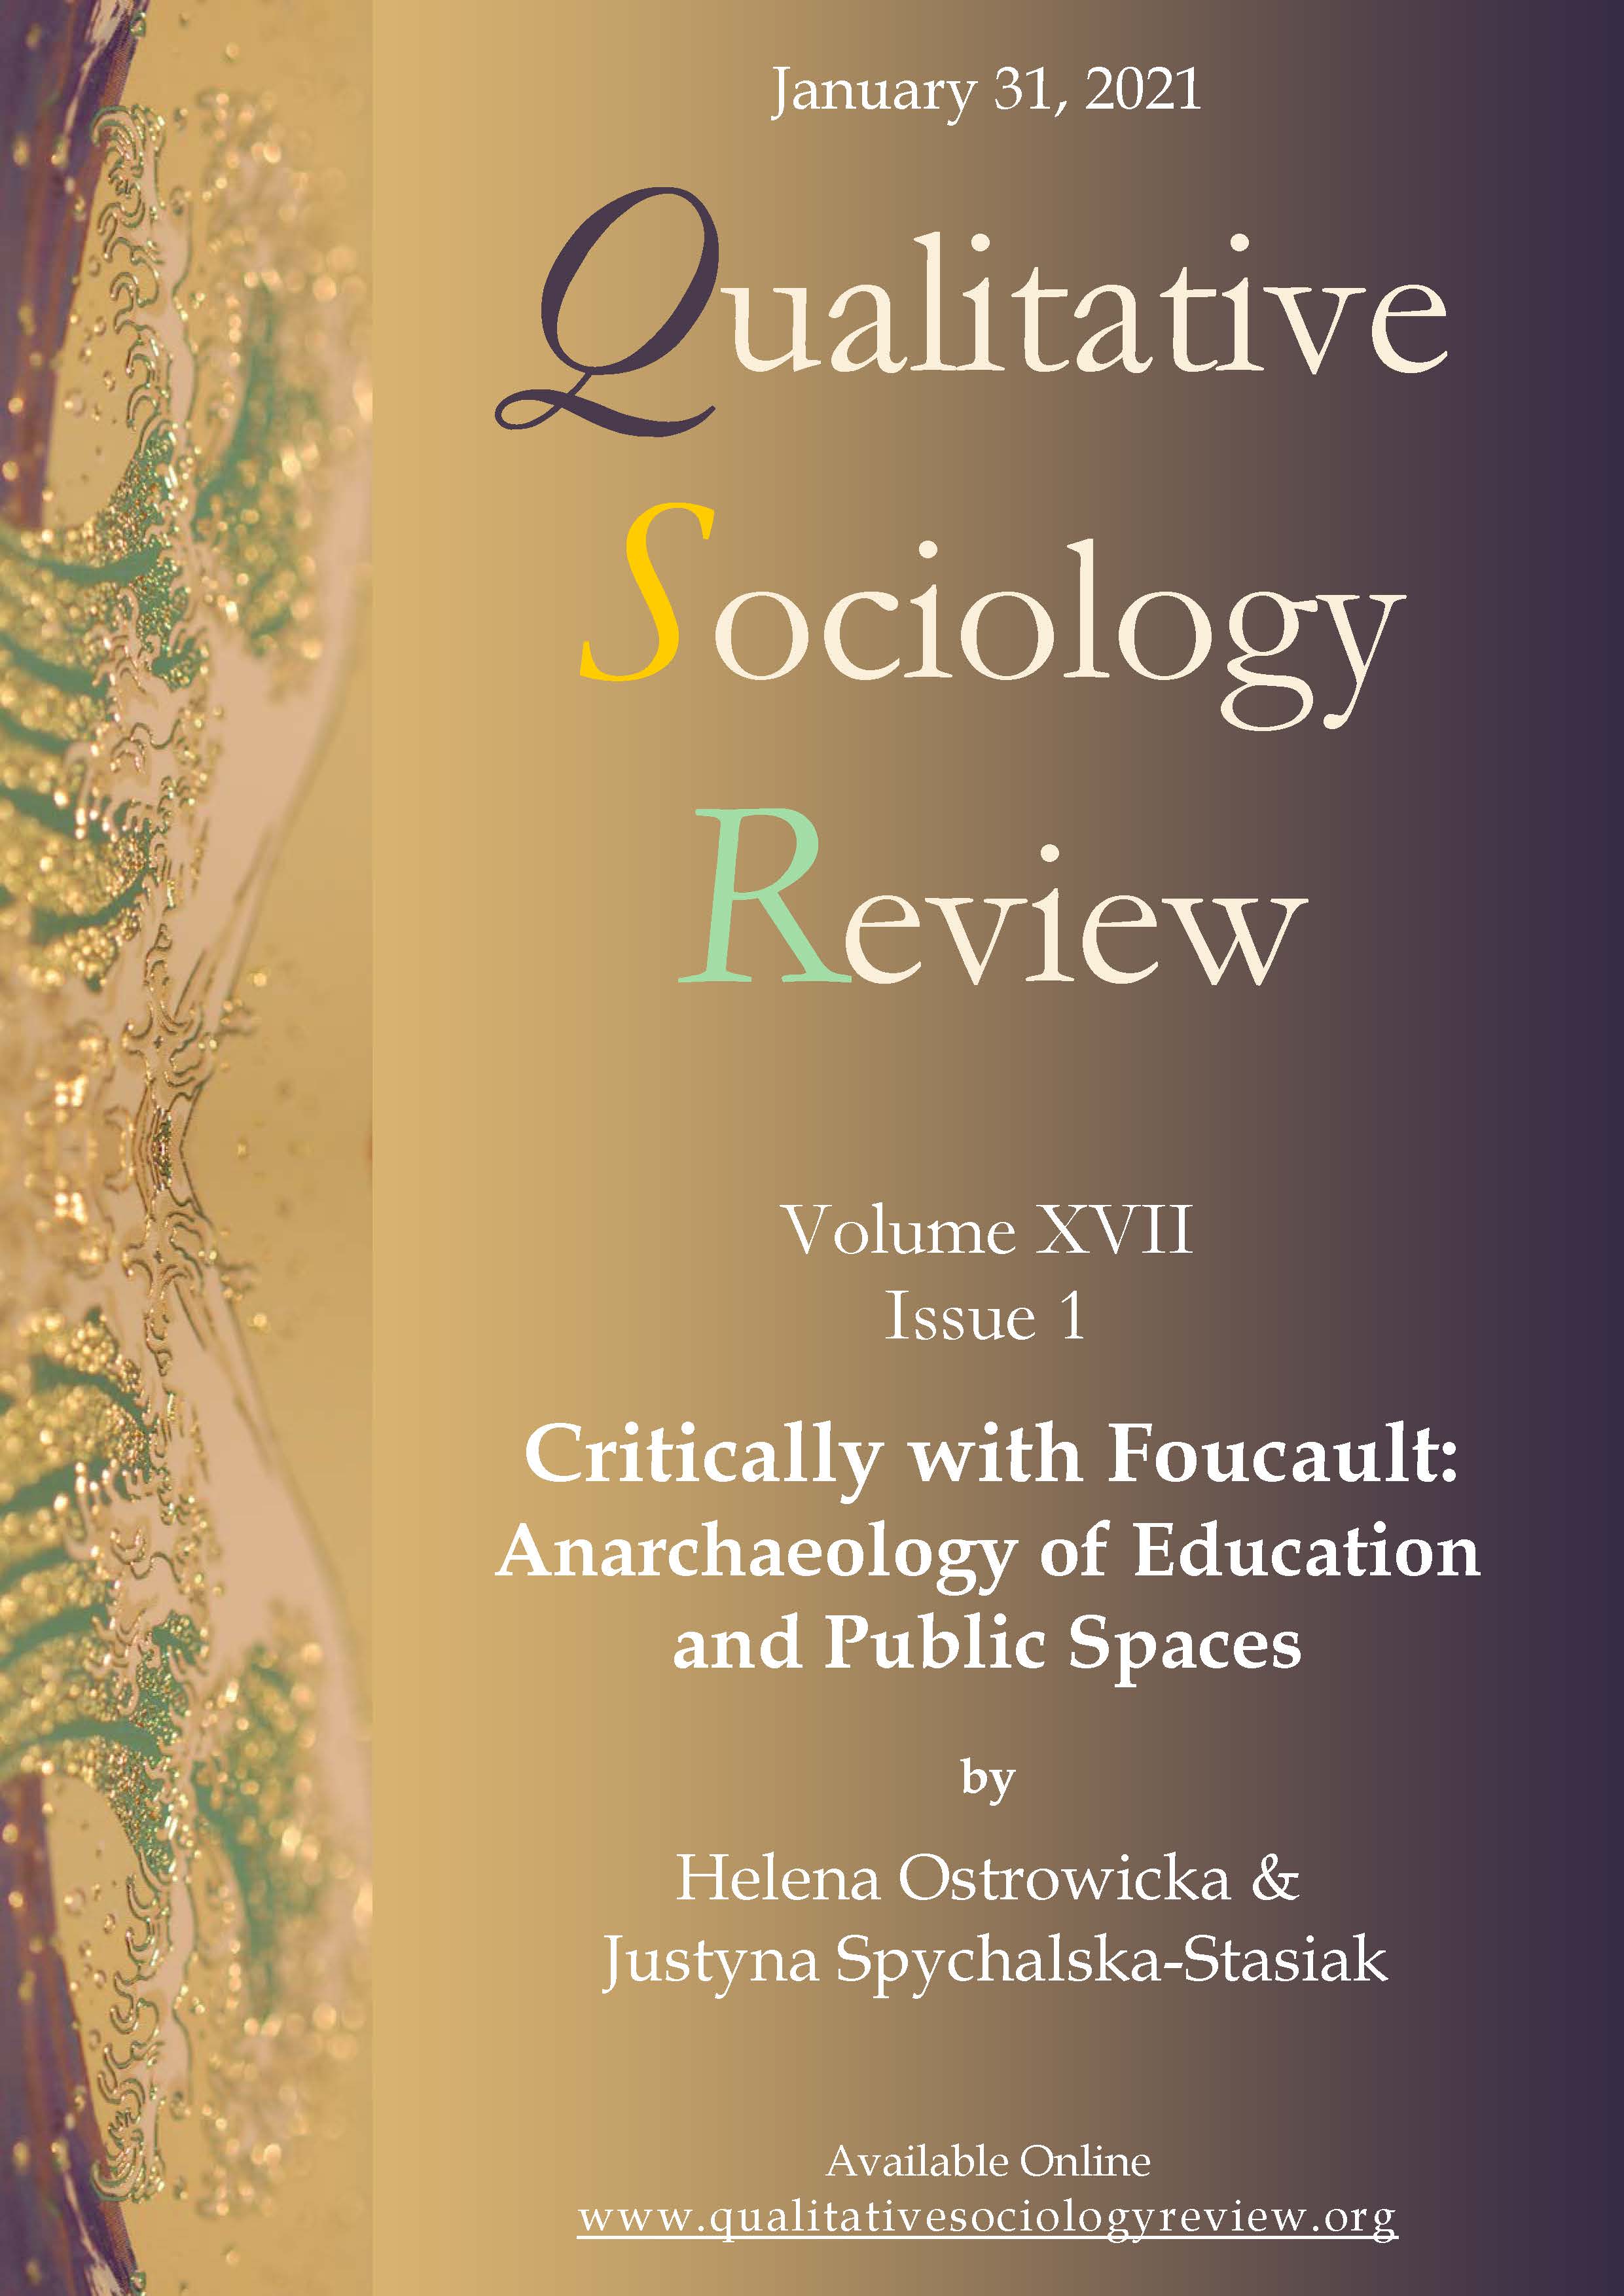 From the Editors. Critically with Foucault: Anarchaeology of Education and Public Spaces